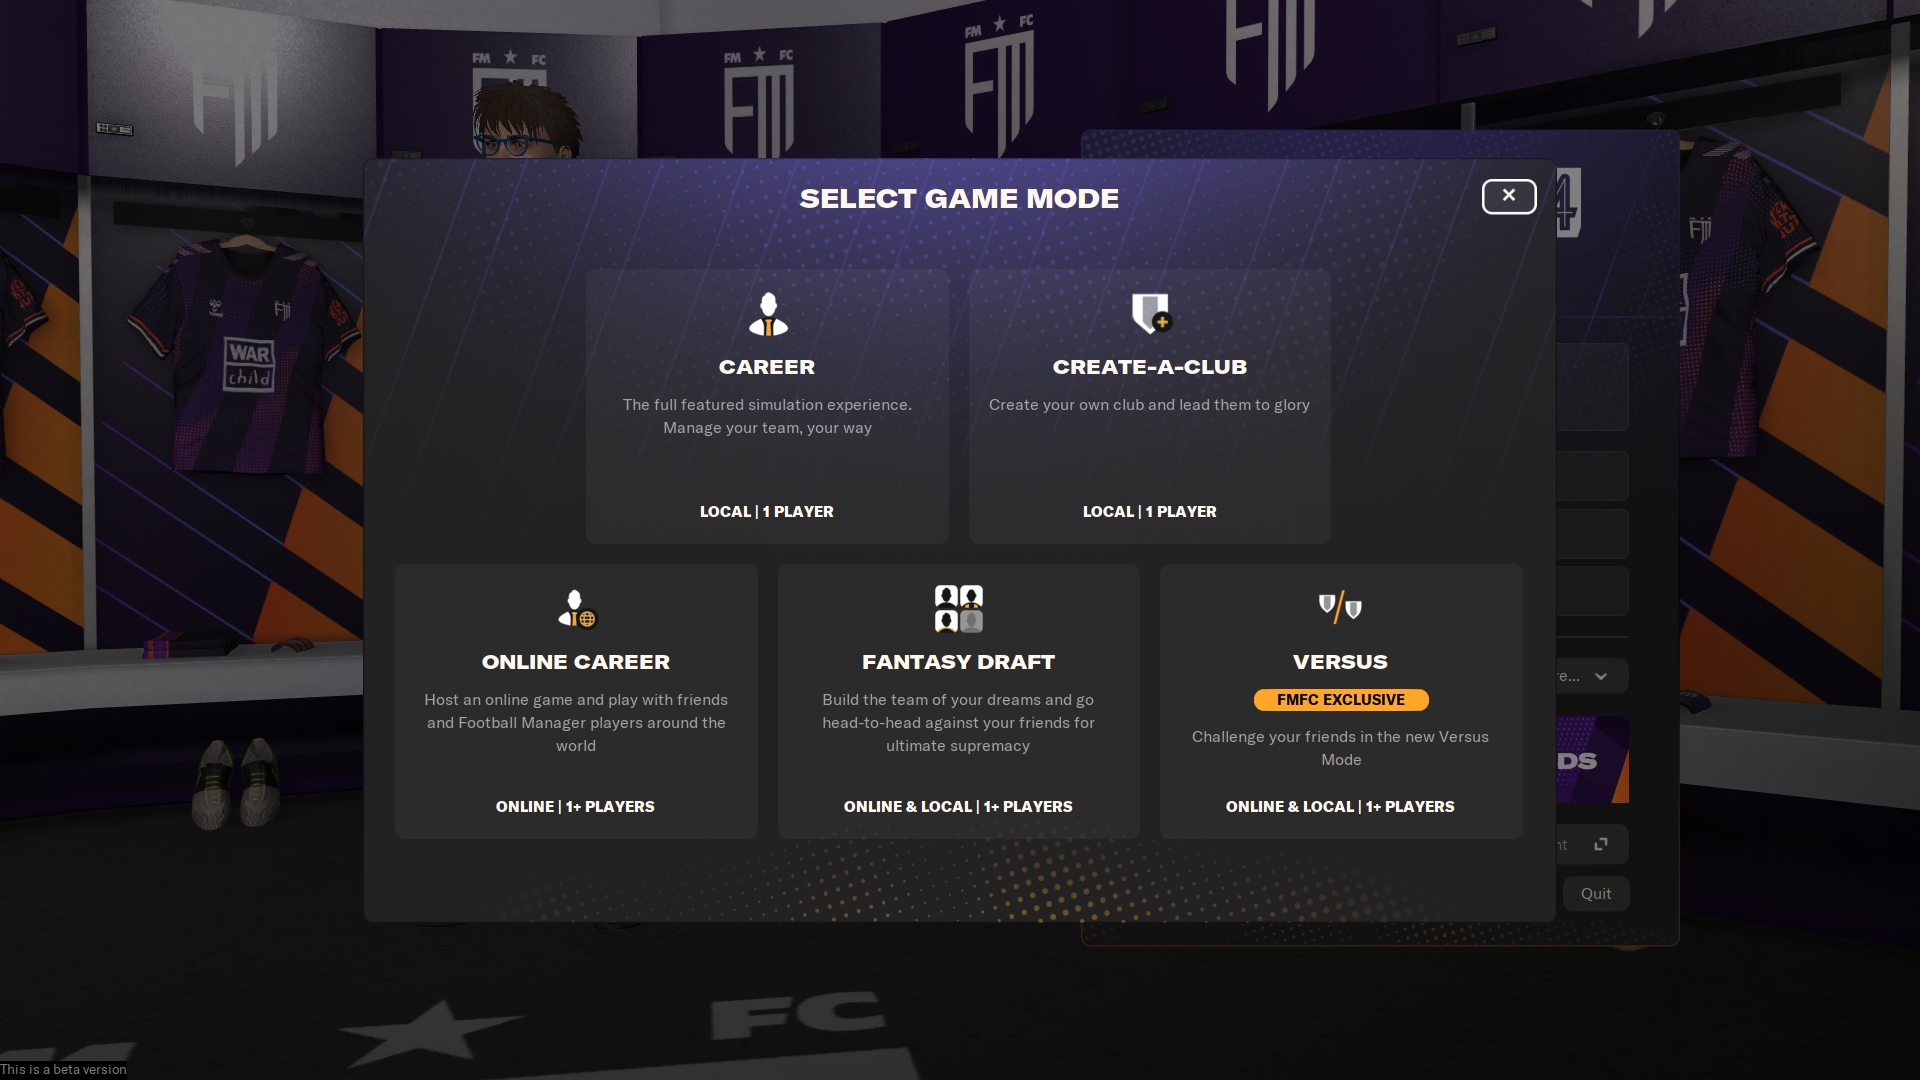 Game Modes